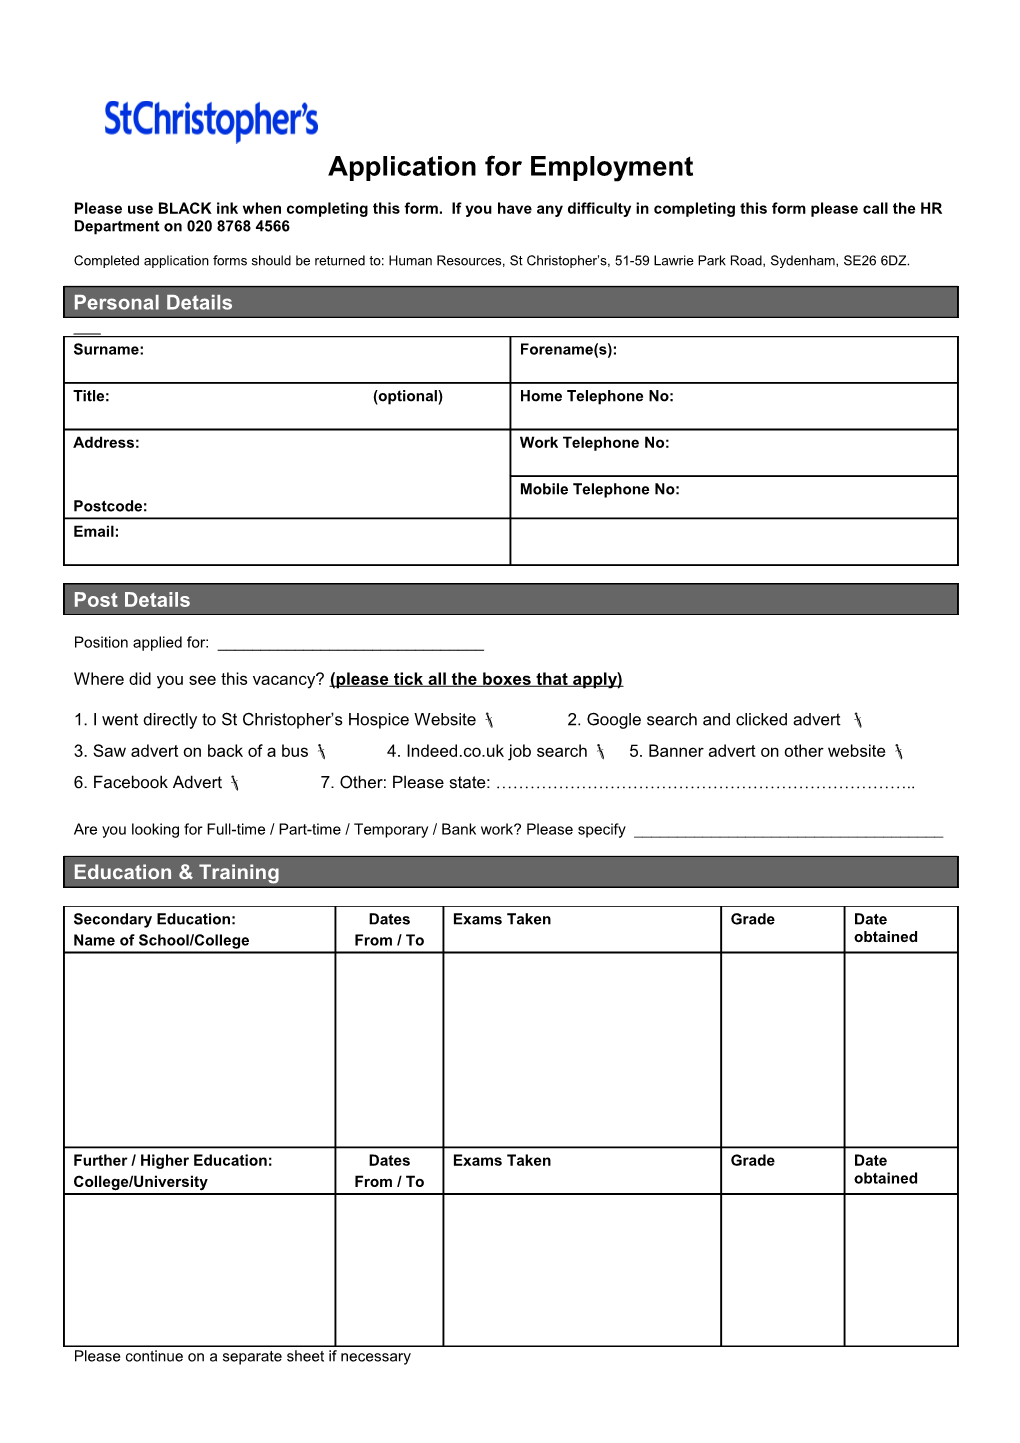 Application for Employment s1